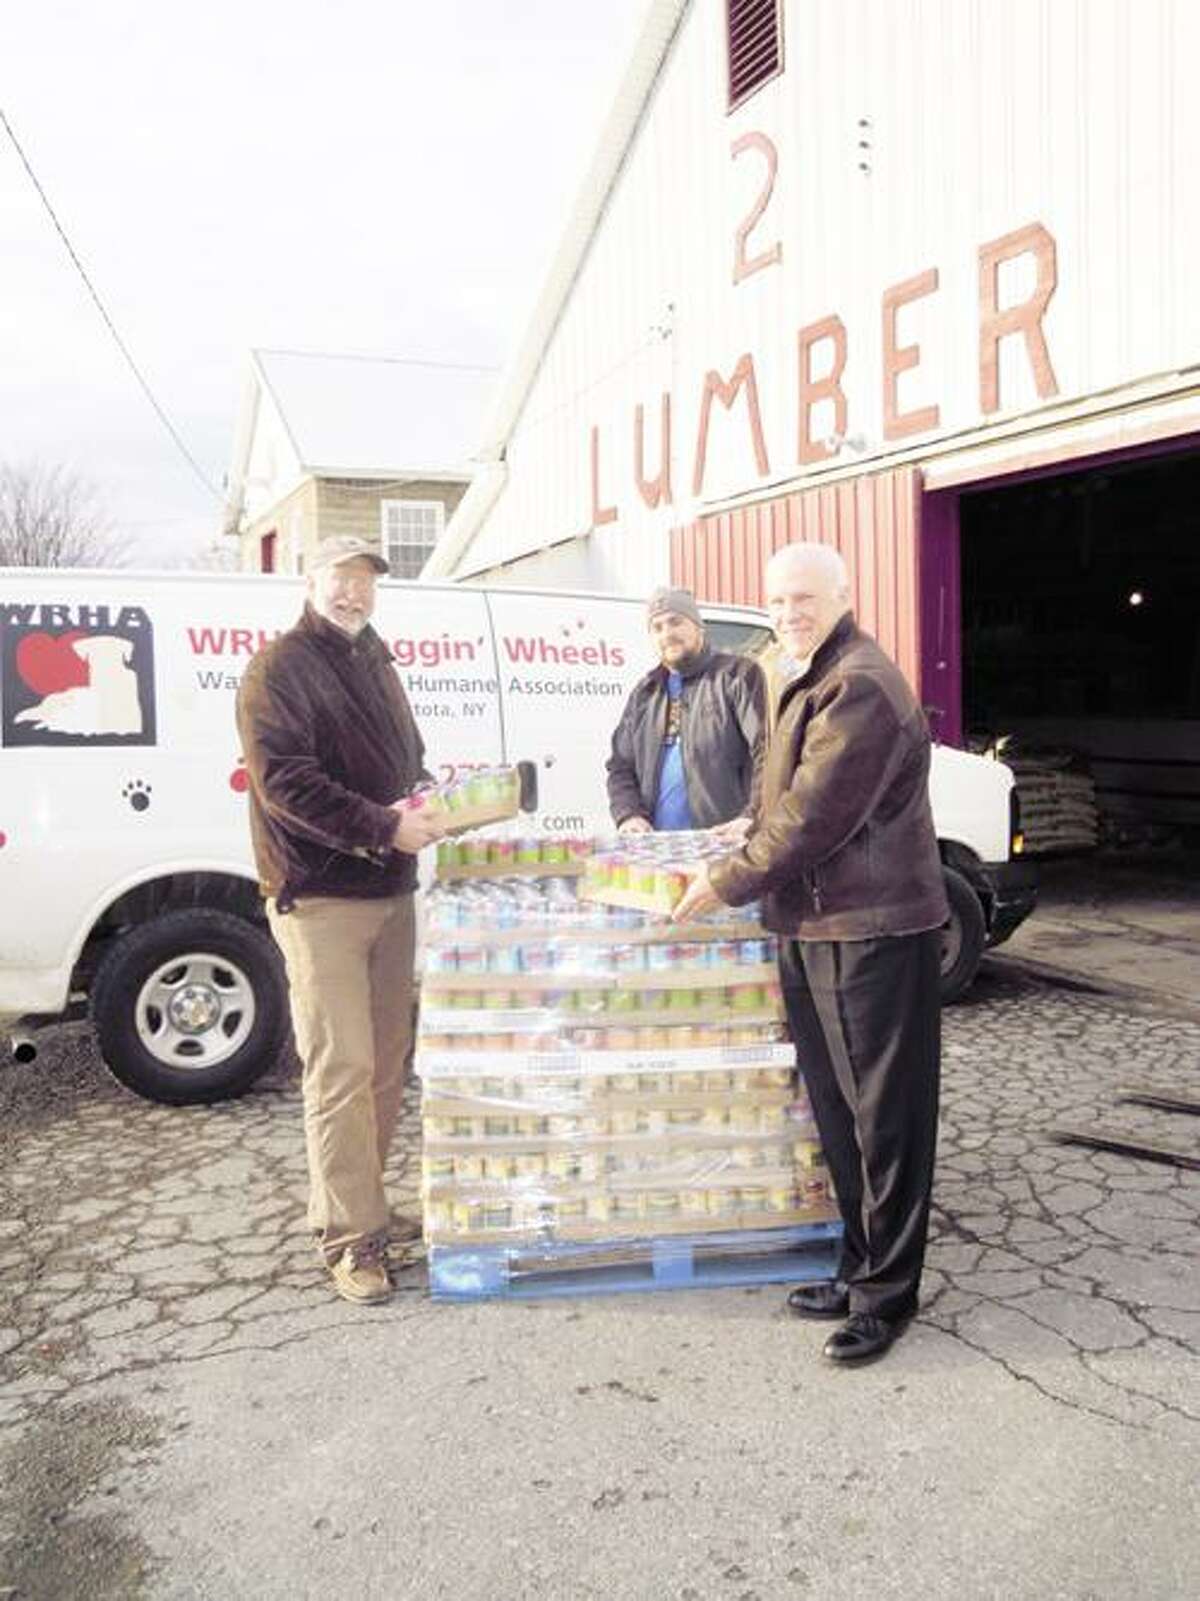 Photo Courtesy WANDERERS' REST From left are Glenn H. Ivers, executive director Wanderers' Rest Humane Association, Patrick Kime, and Doug Tudman, director sales and marketing at Isadore A. Rapasadi & Sons. Rapasadi transported the pallets from the Del Monte warehouse in Pennsylvania to Canastota. Kime's hardware store in Canastota is warehousing the pallets and helping to load them for the different organizations as they arrive to receive their pallet.